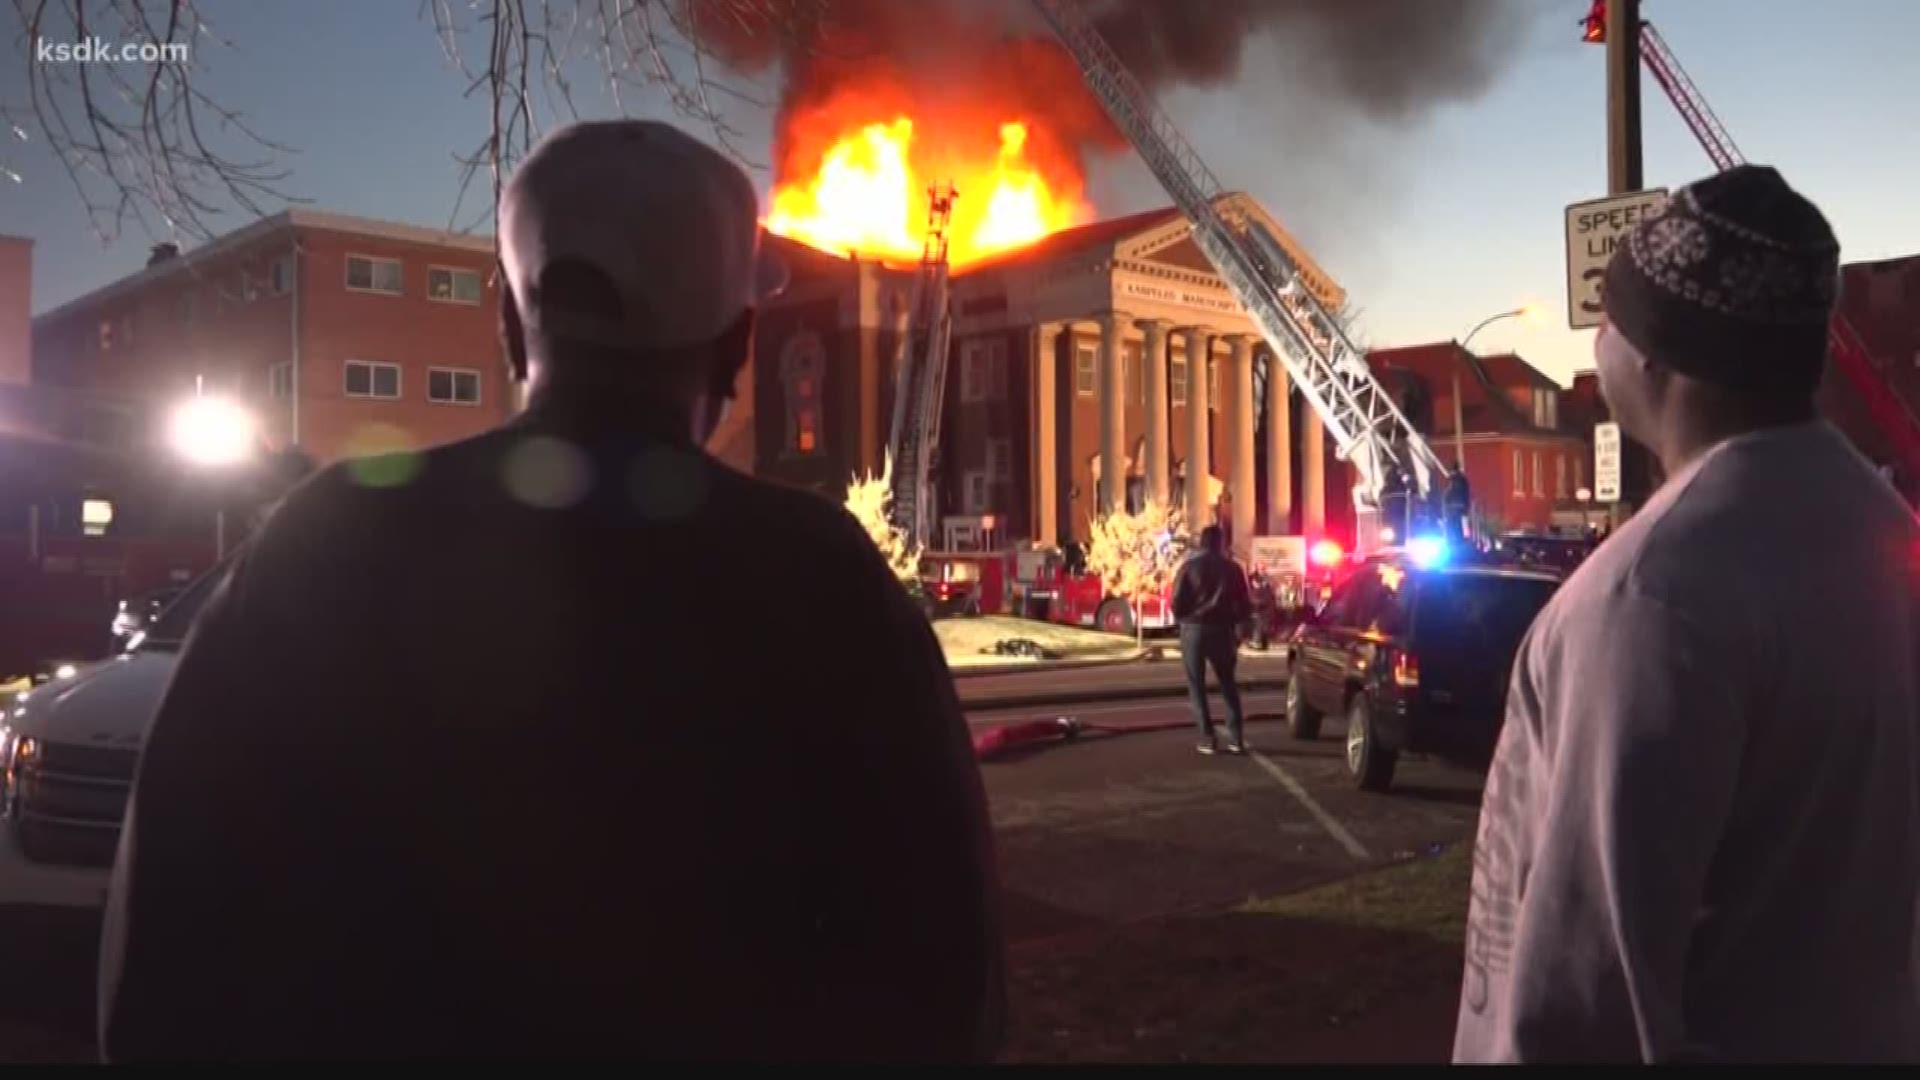 More than 80 firefighters worked to put out the large fire at a former church that now houses the Karpeles Manuscript Library Museum.